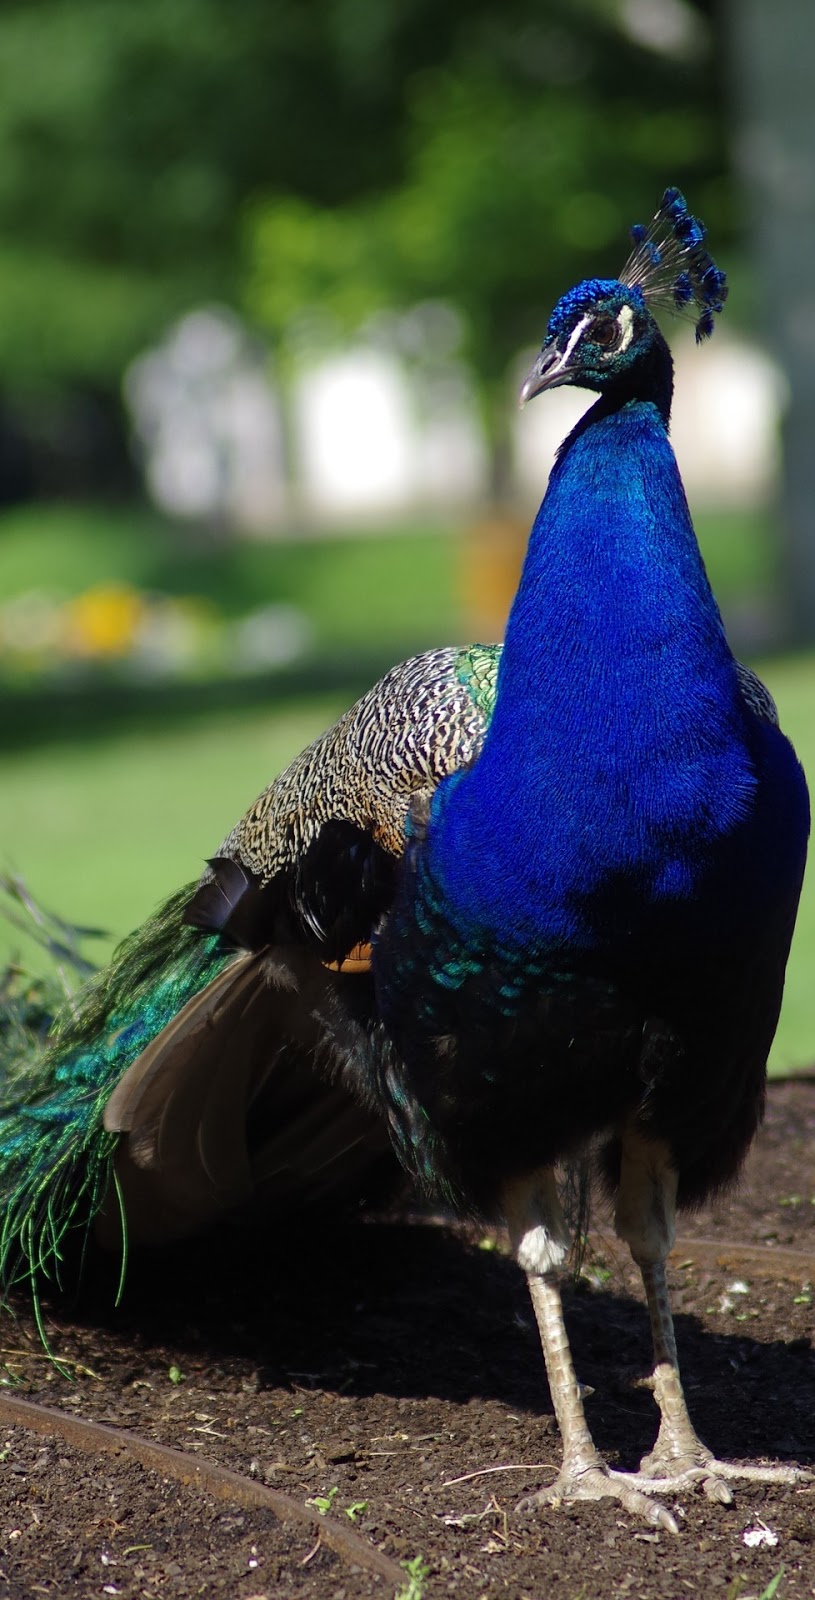 Portrait picture of a peacock.